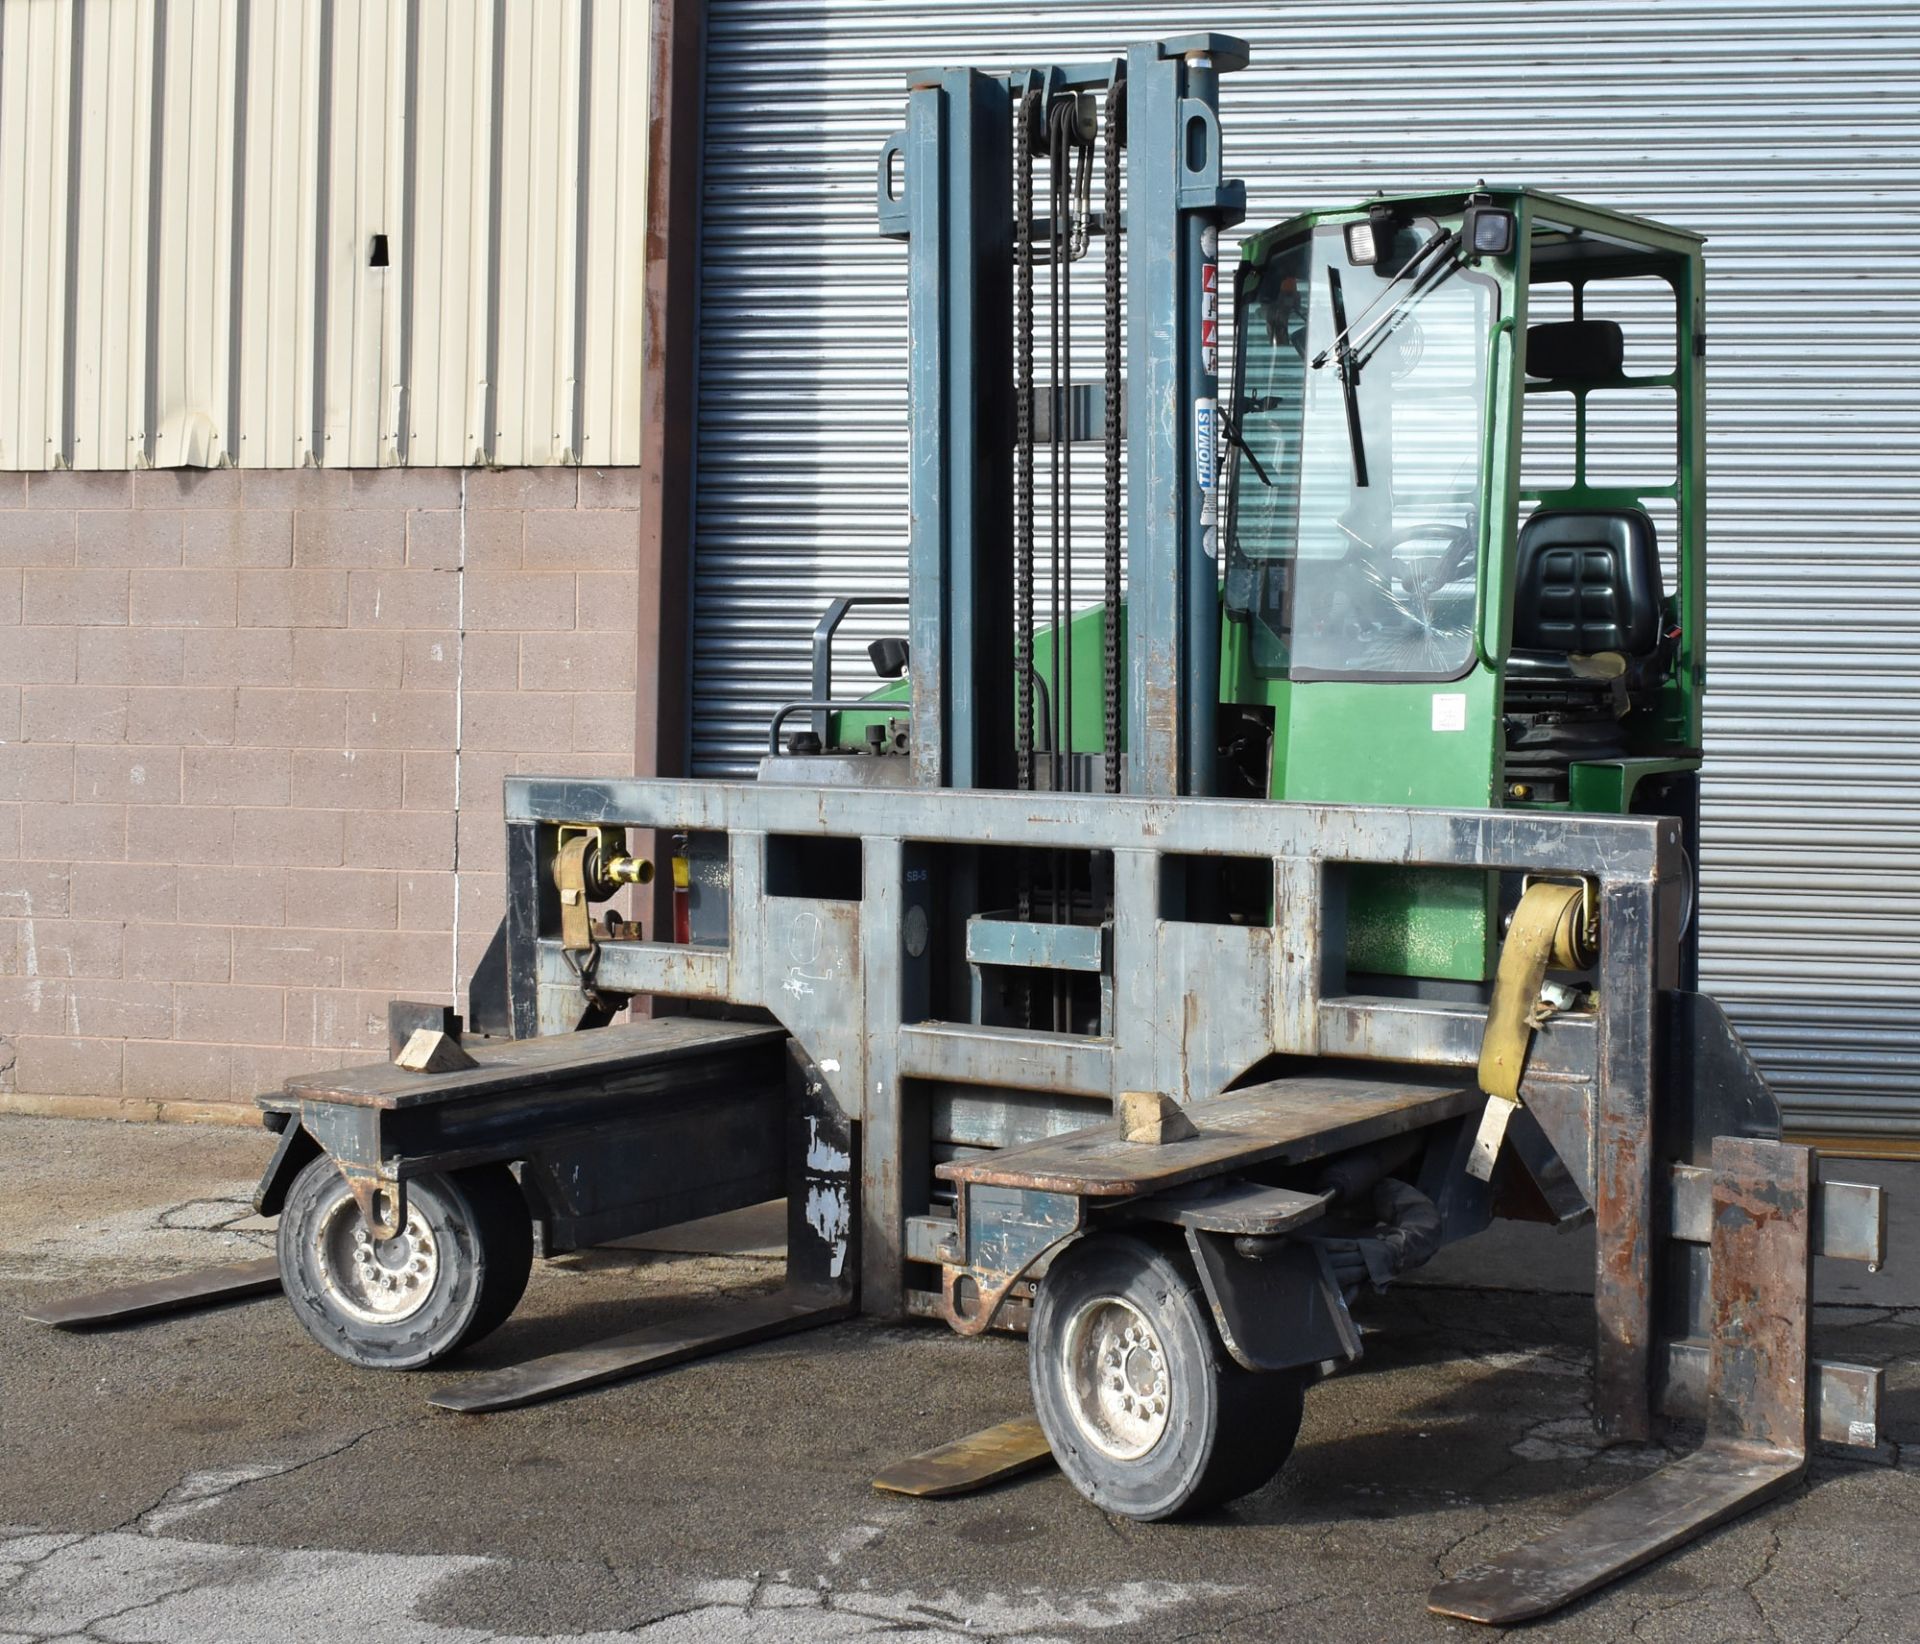 COMBILIFT (2006) CL22100LC48 LPG SIDE LOADER FORKLIFT WITH 10,000 LB. CAPACITY, 168" VERTICAL LIFT,